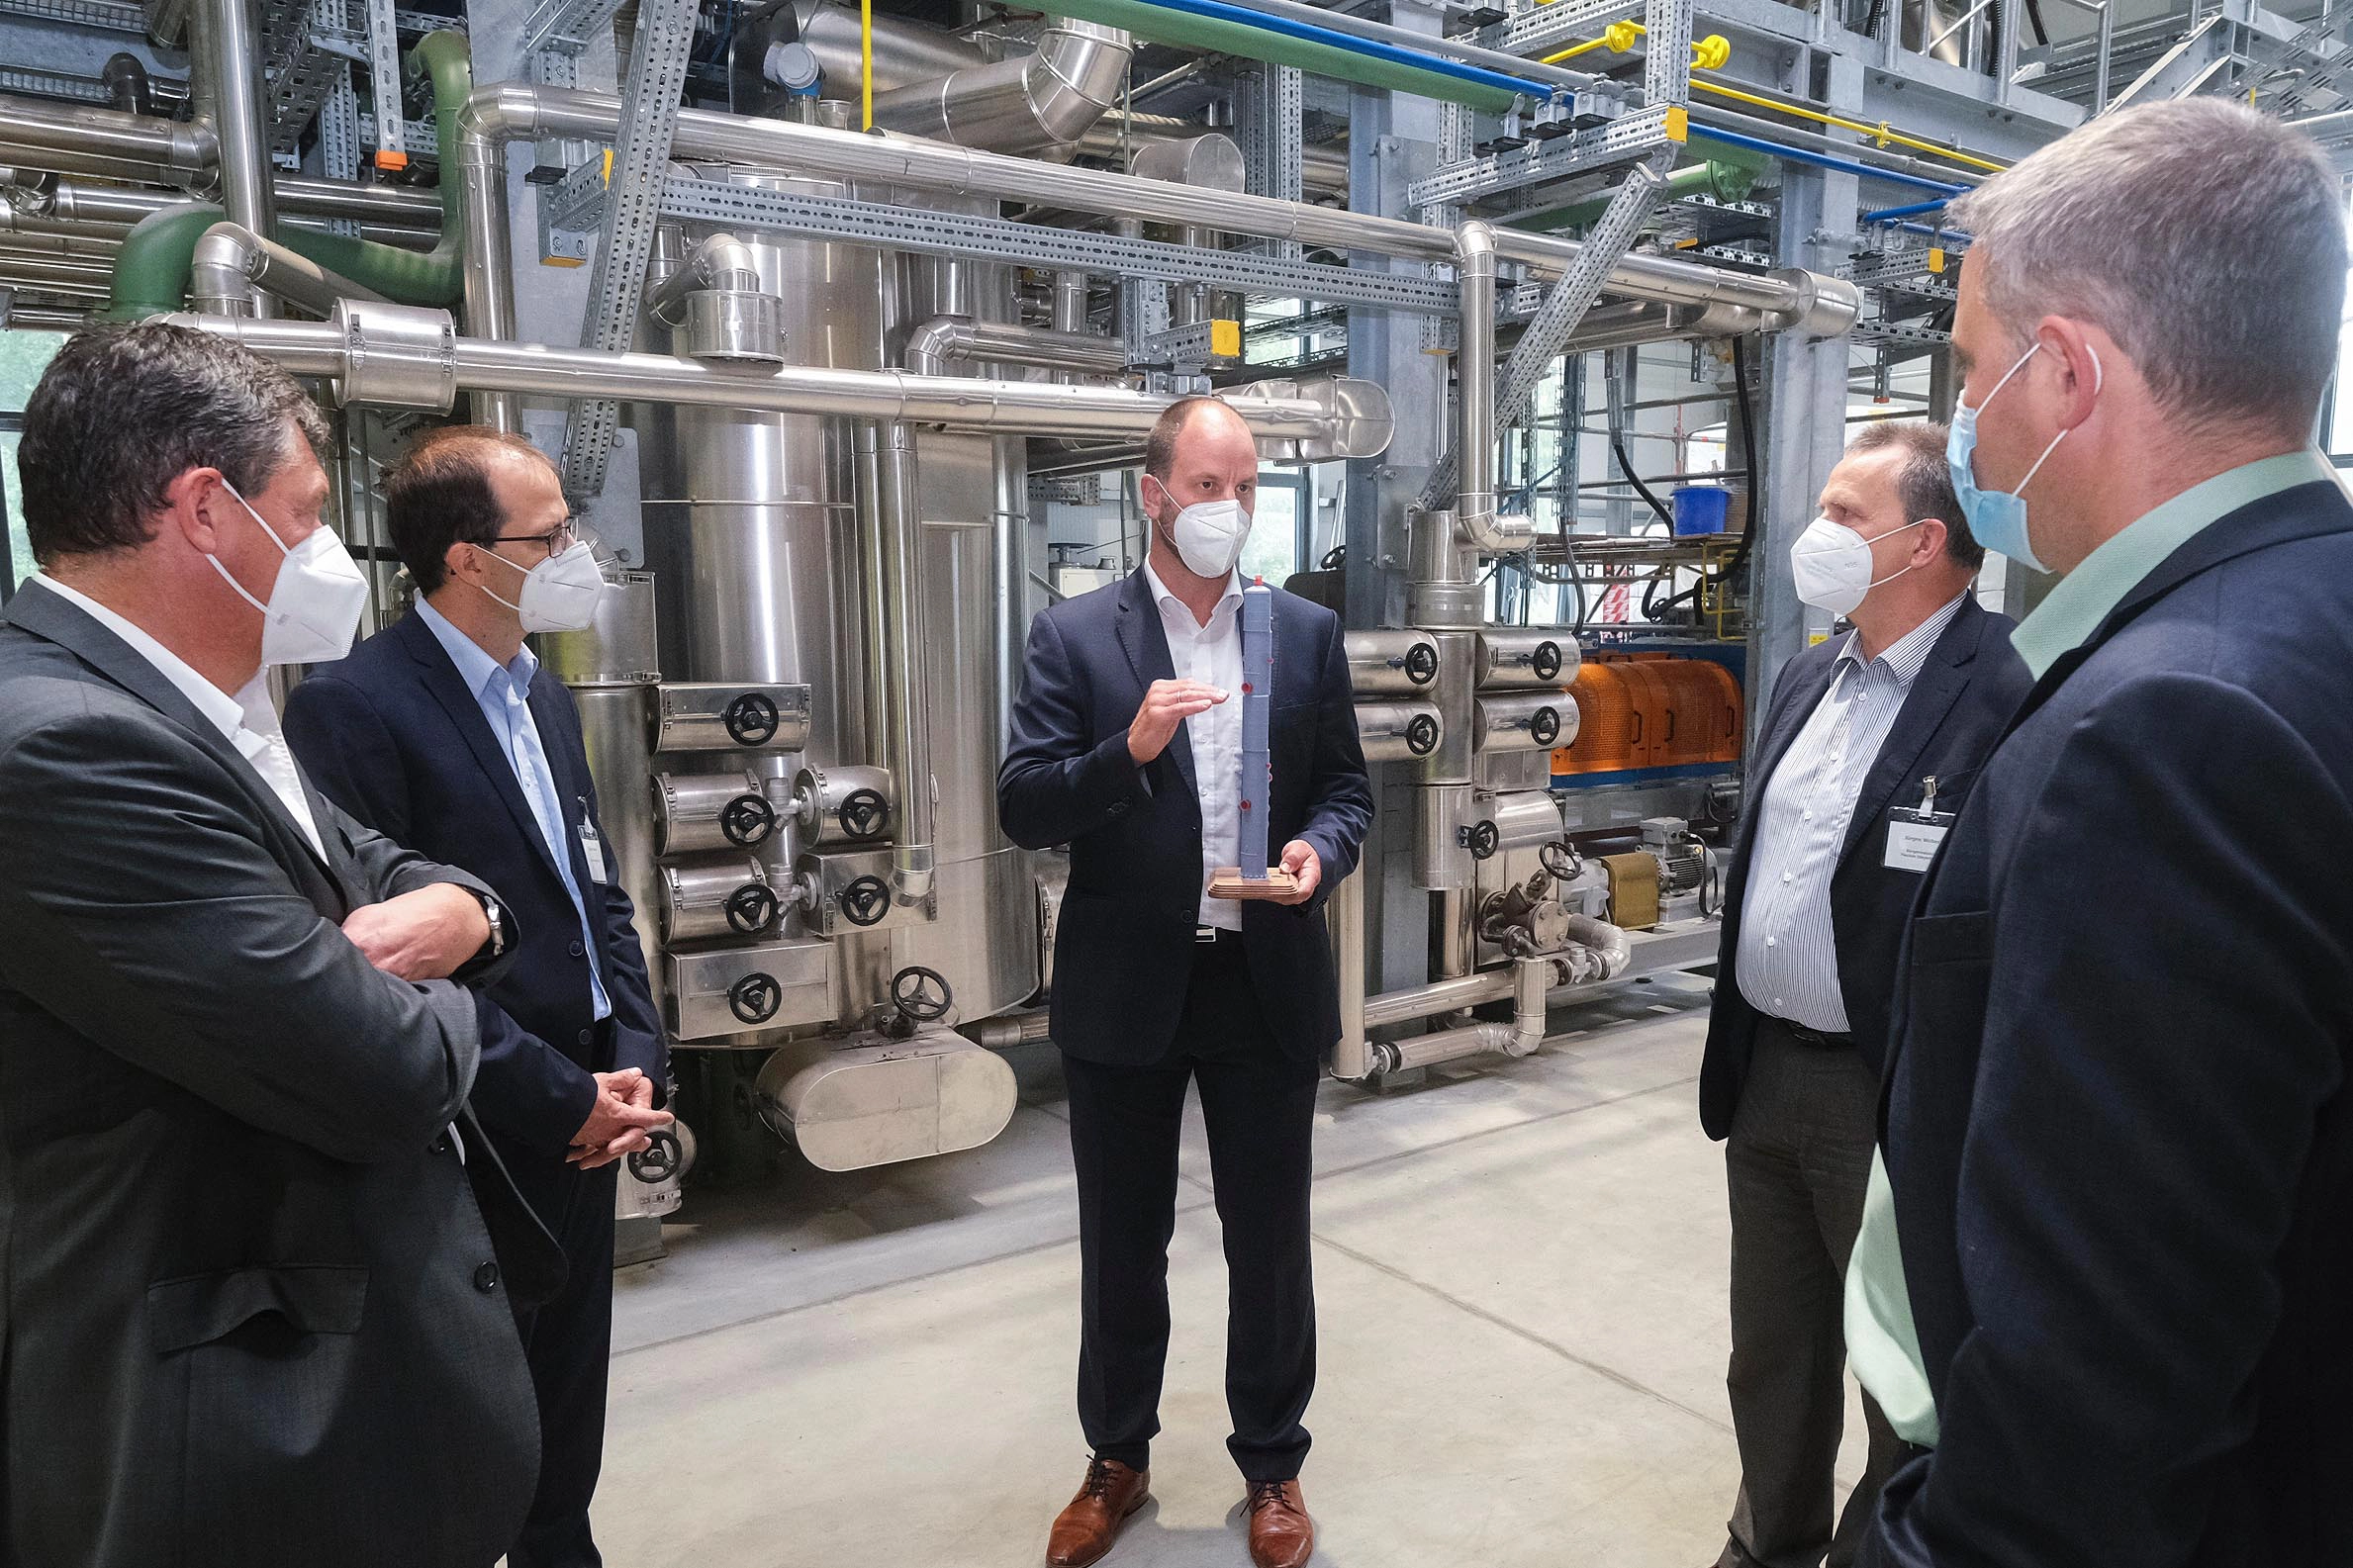 CAPHENIA produces E-fuels in Lower Saxony